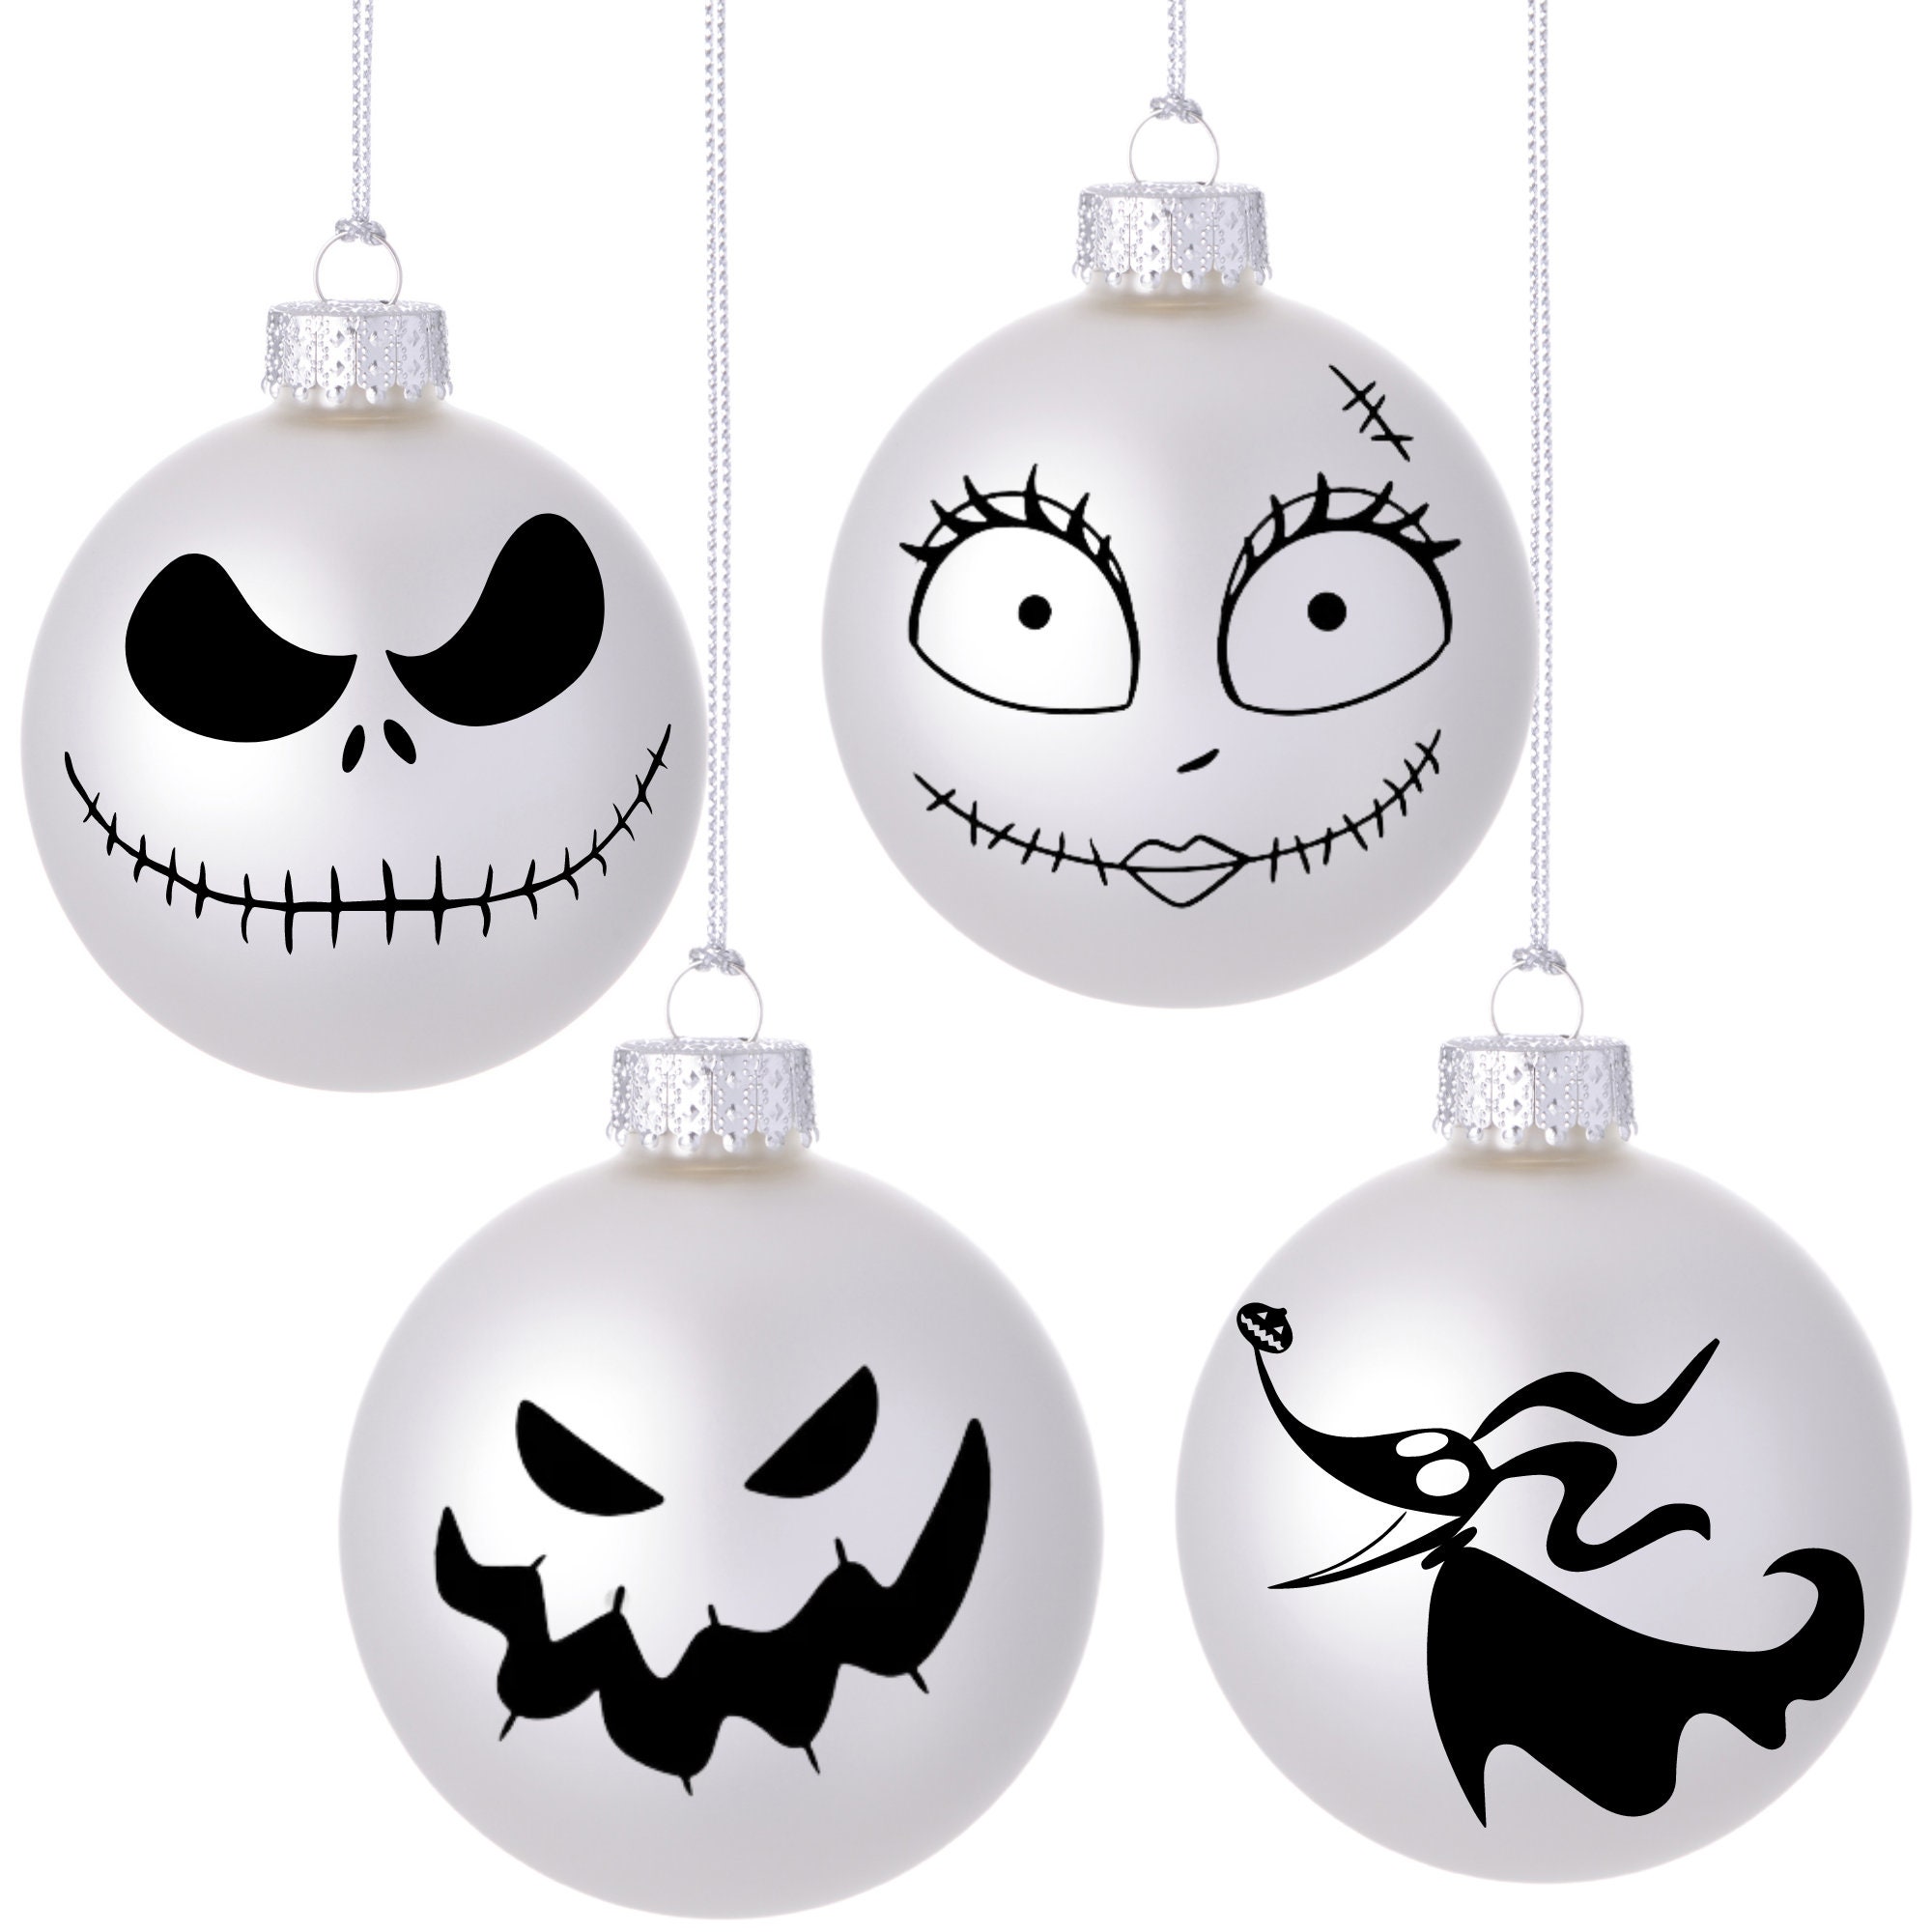 Nightmare Before Christmas Inspired Christmas Tree Ornaments - Etsy